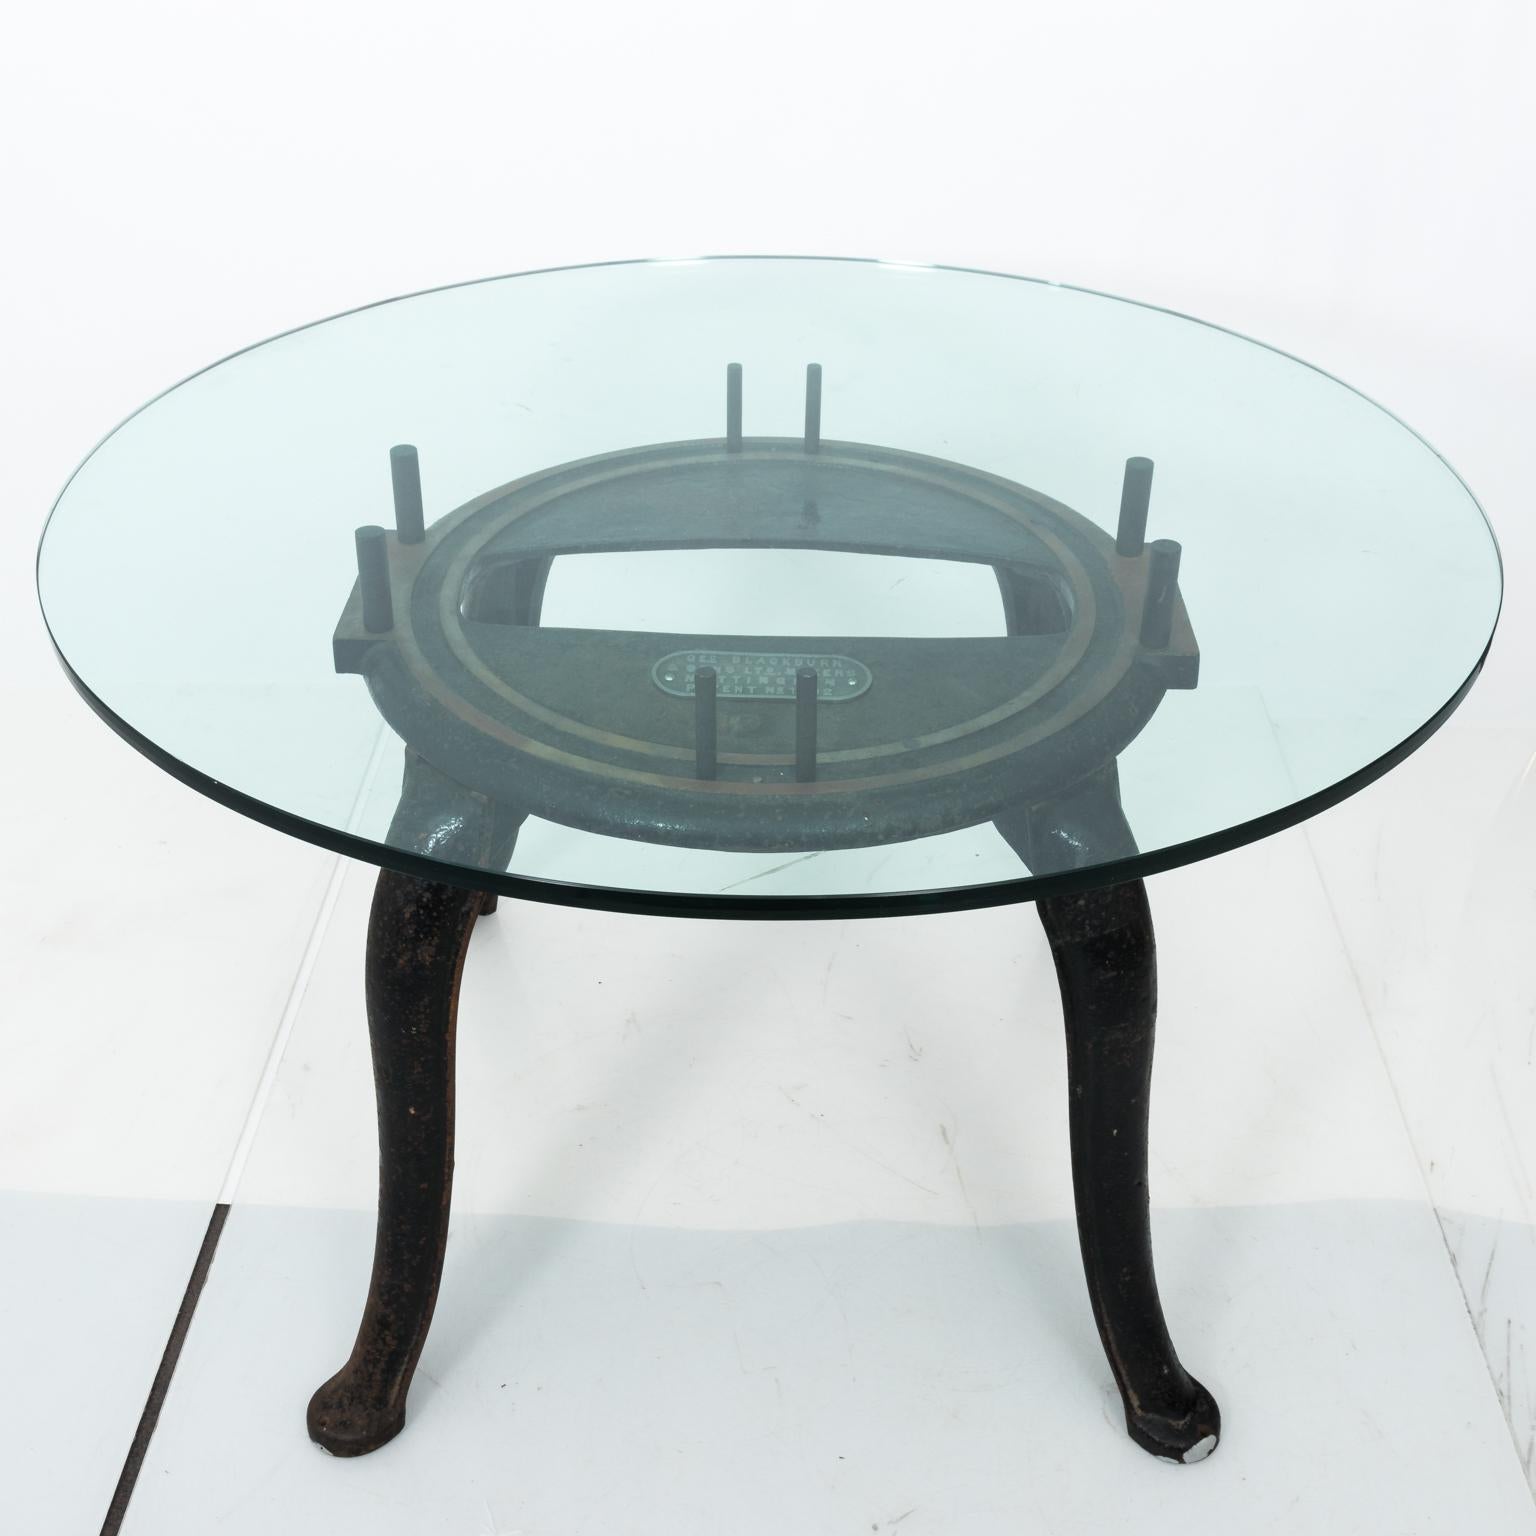 English Industrial Iron Base Center Table with Glass Top